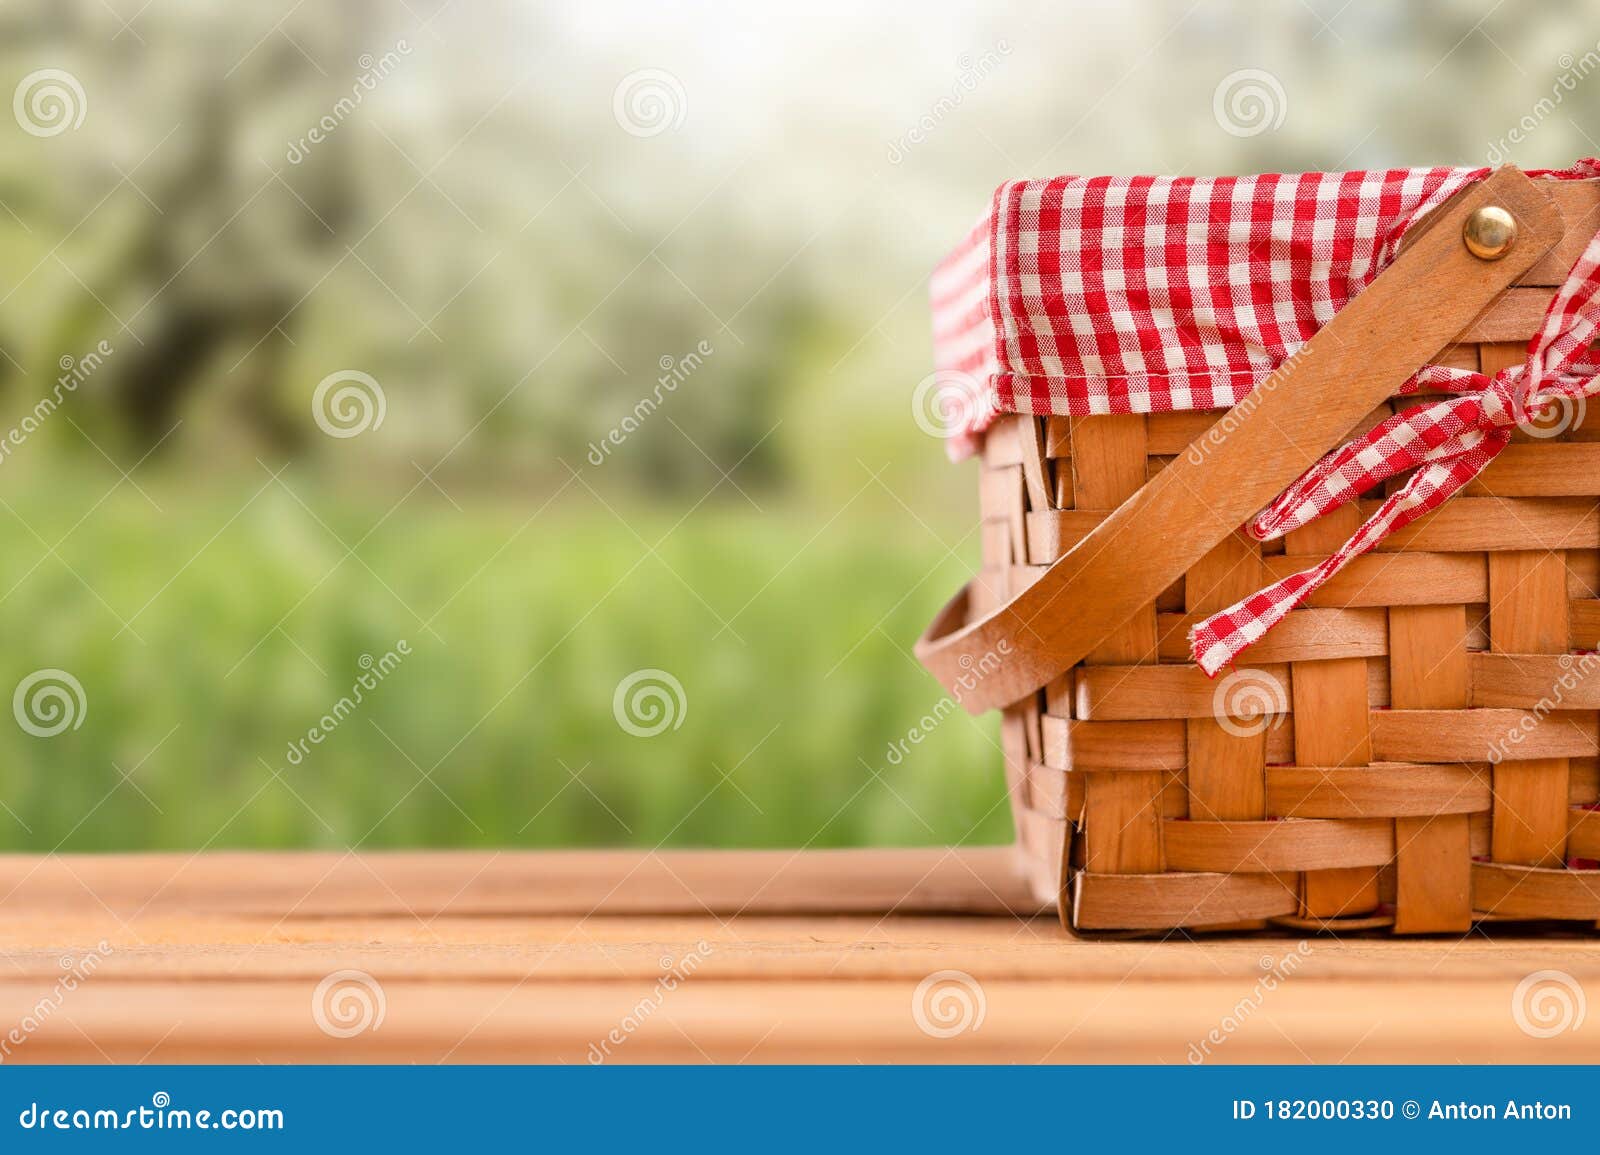 Picnic Basket On A Table Against The Background Of Nature Rest And